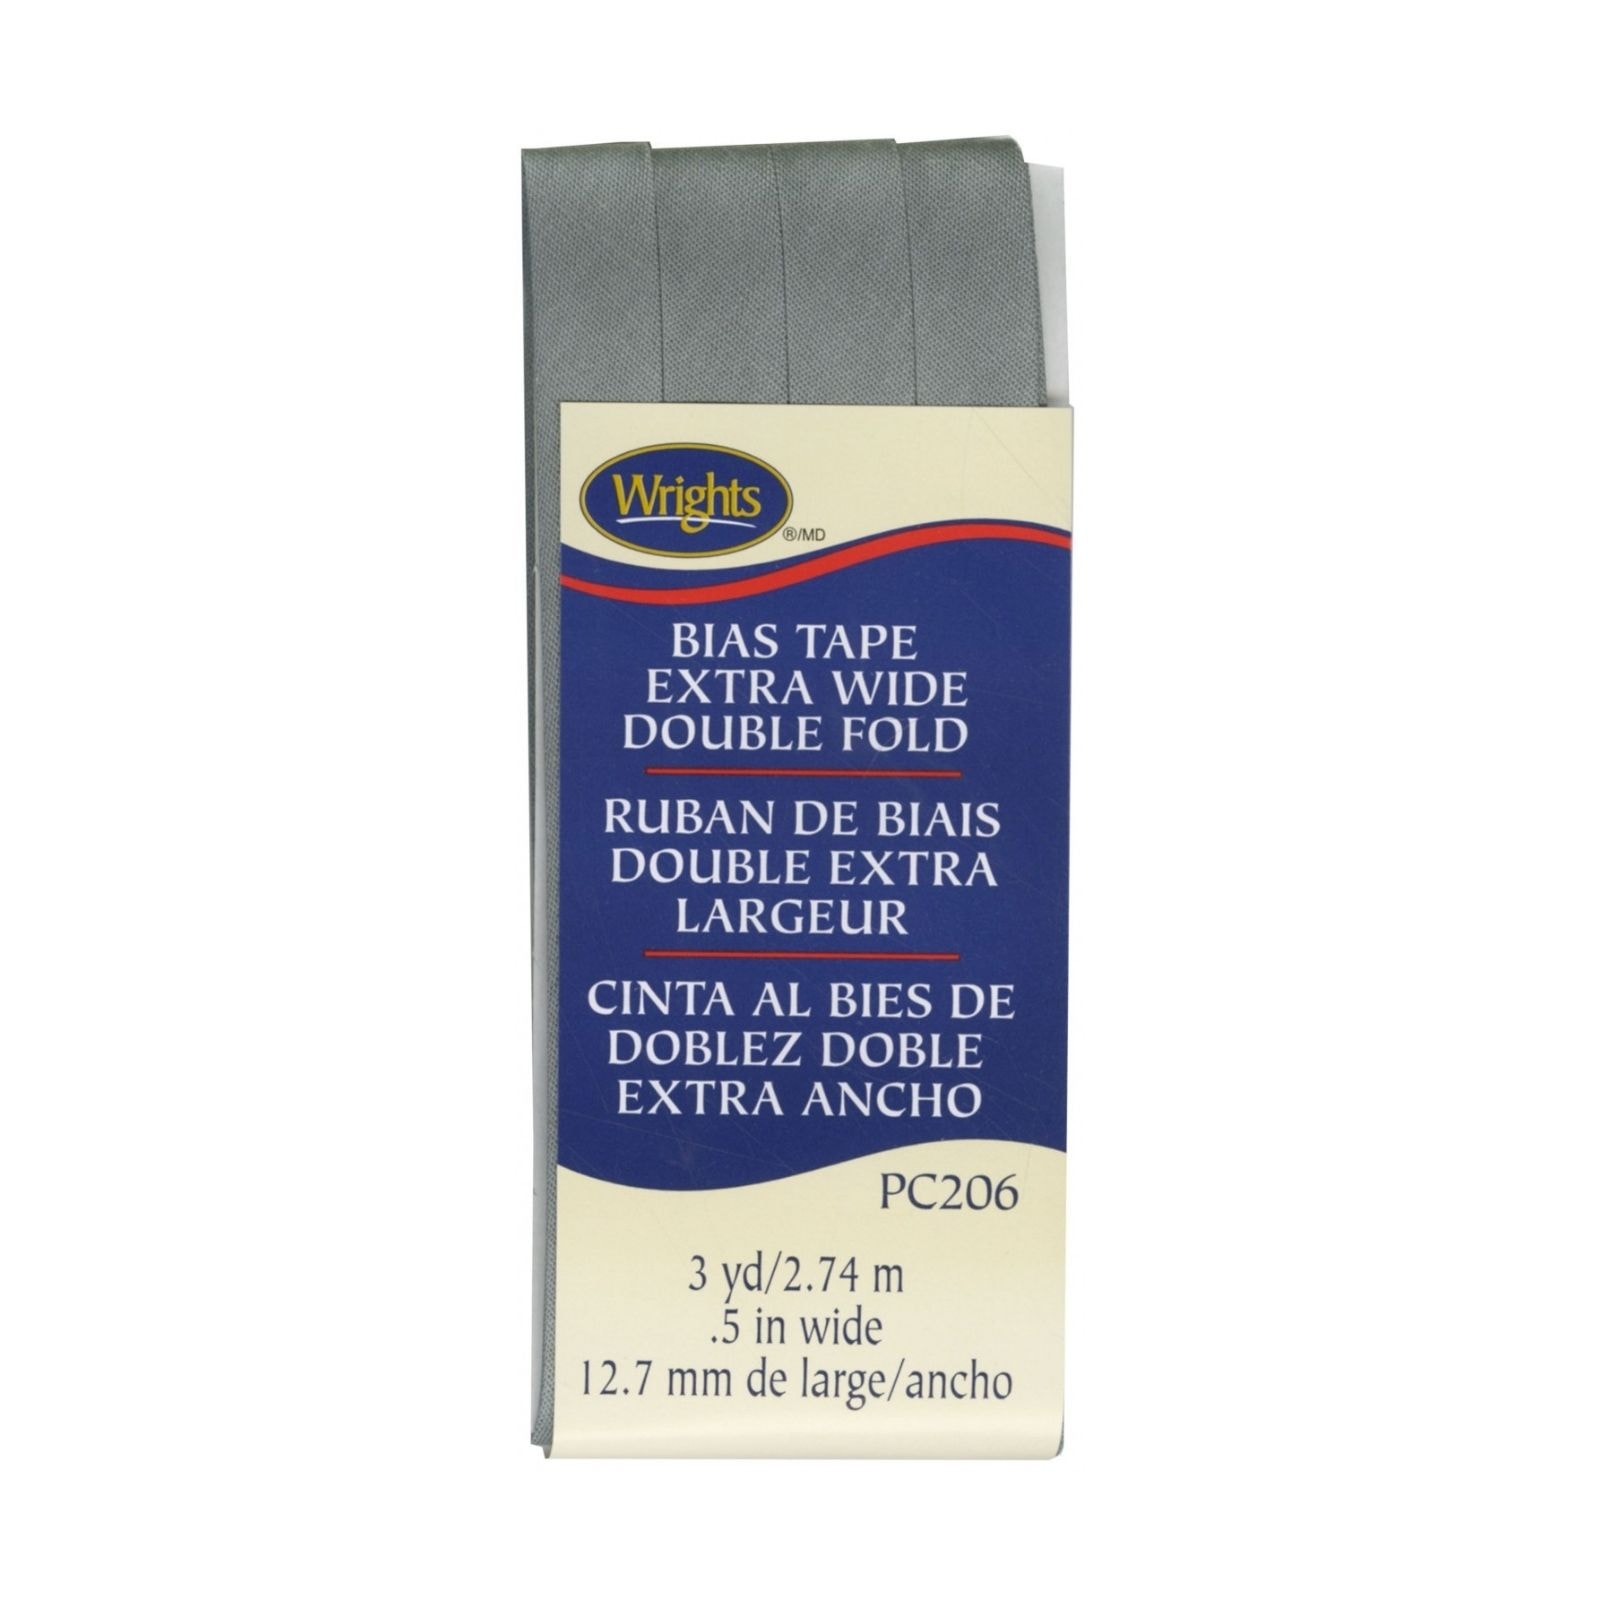 Wrights Extra Wide Double Fold Bias Tape - Light Grey